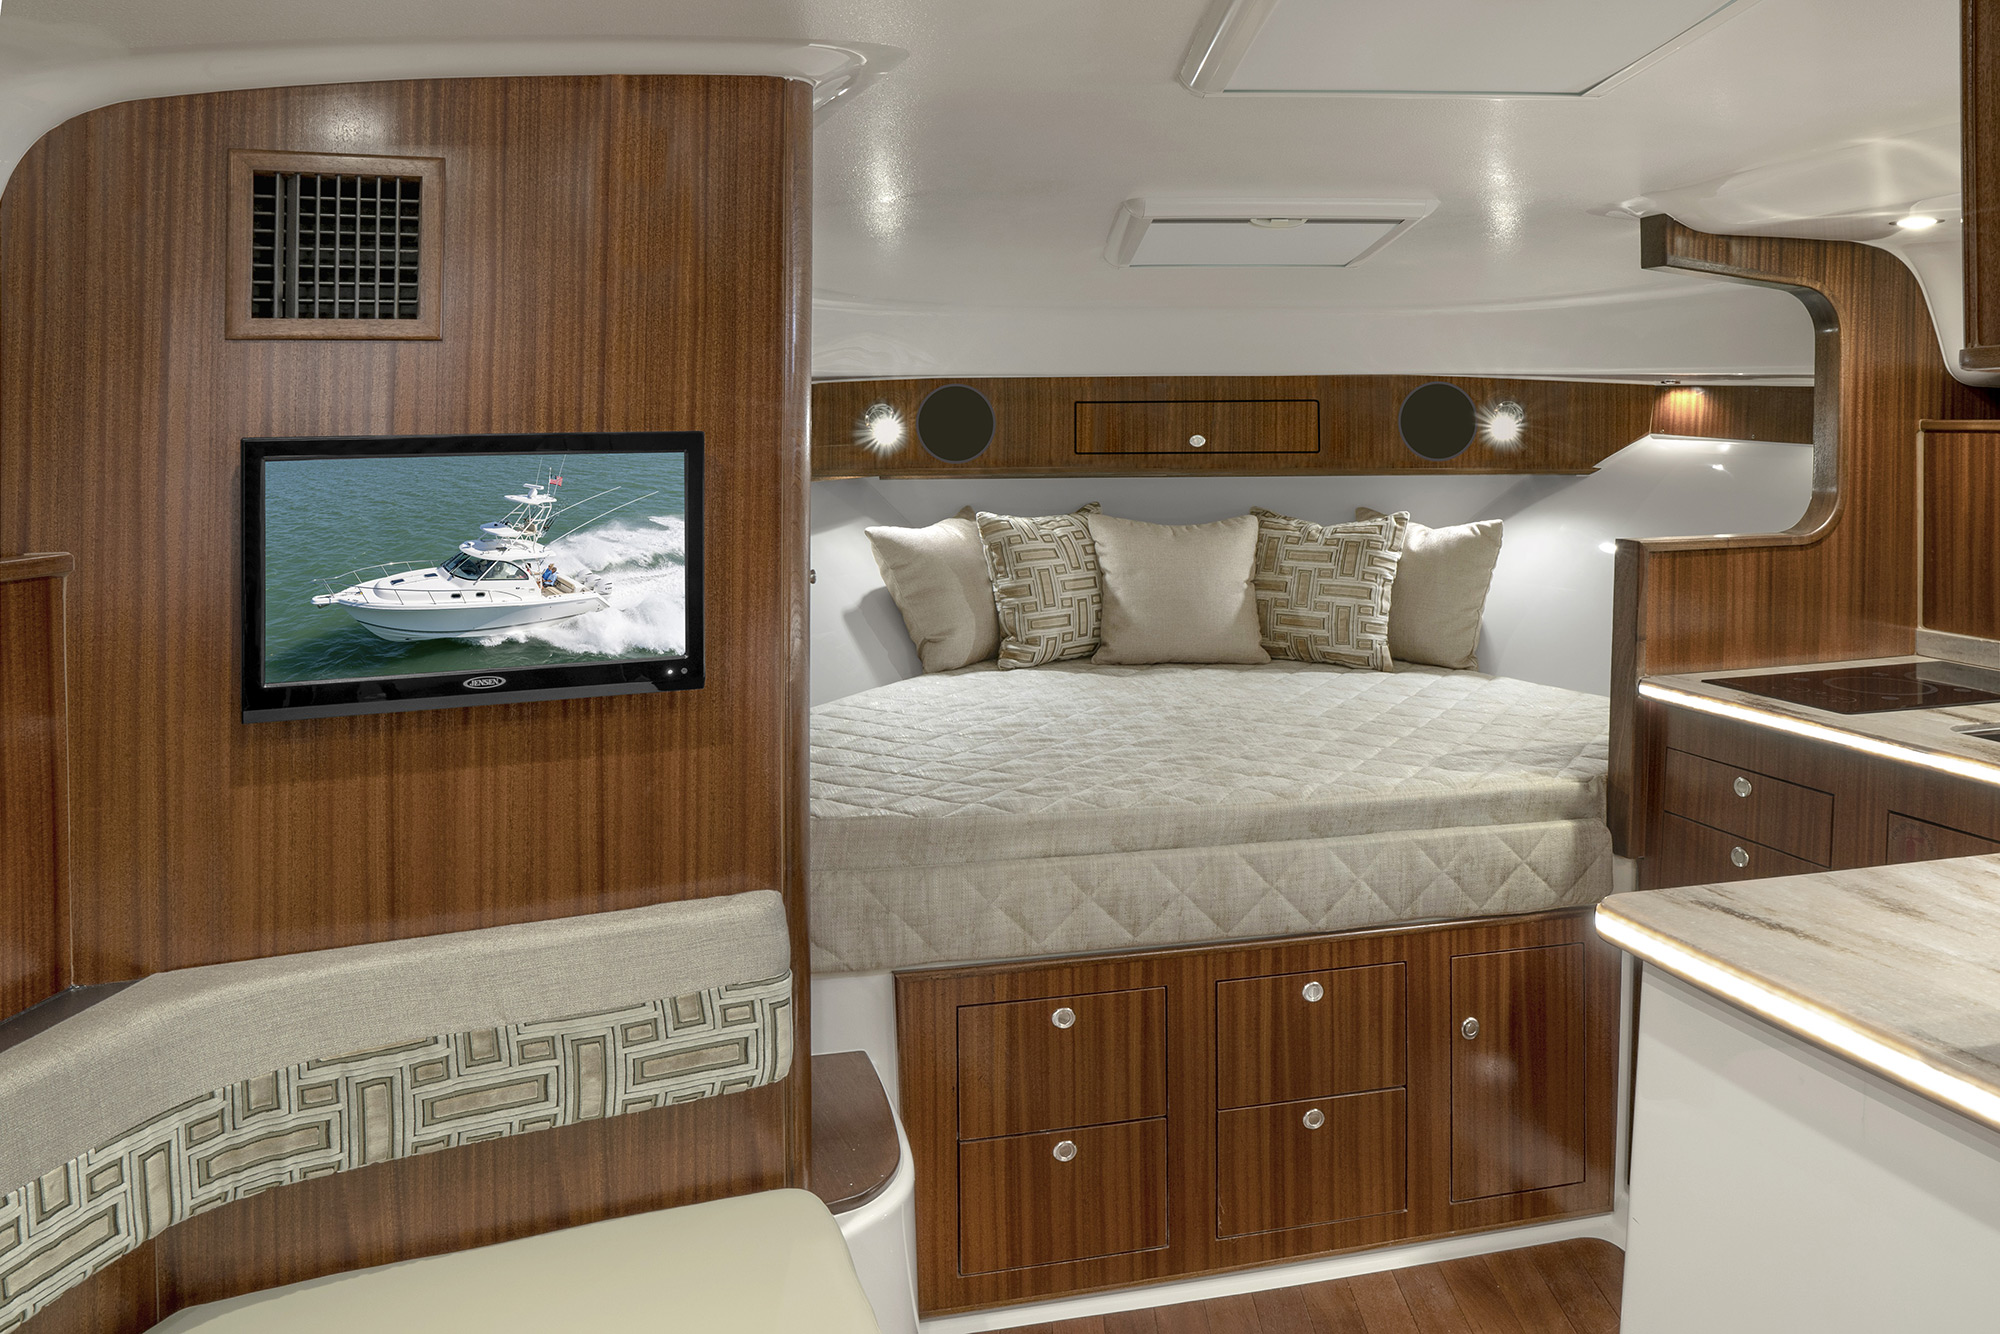 OS 385 Offshore boat cabin with berth for overnighting.